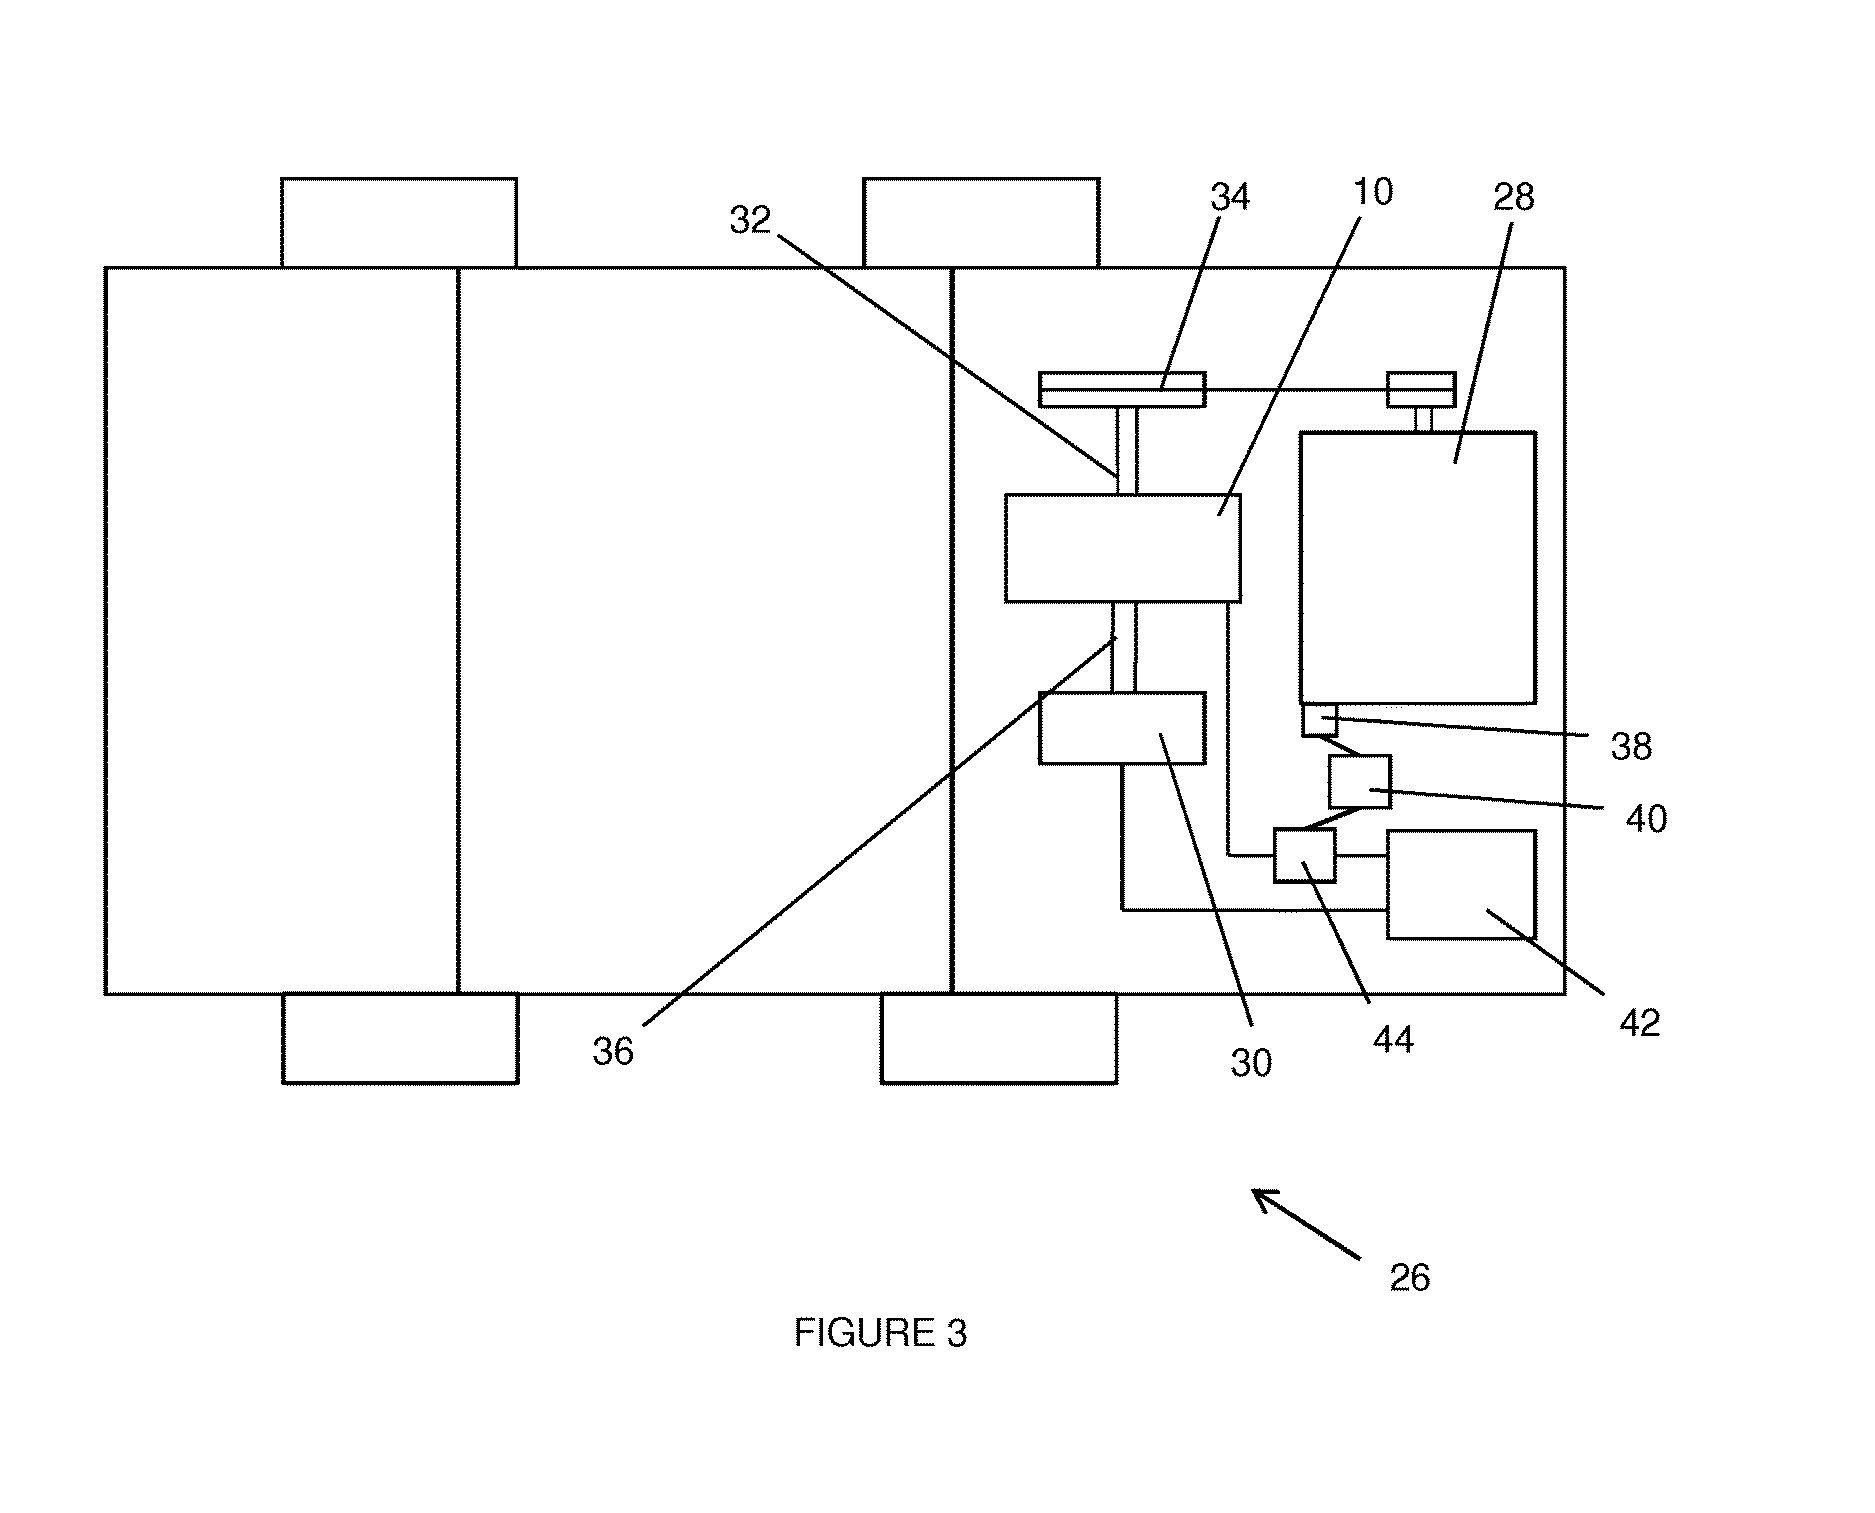 Generator comprising a variable speed magnetic gear